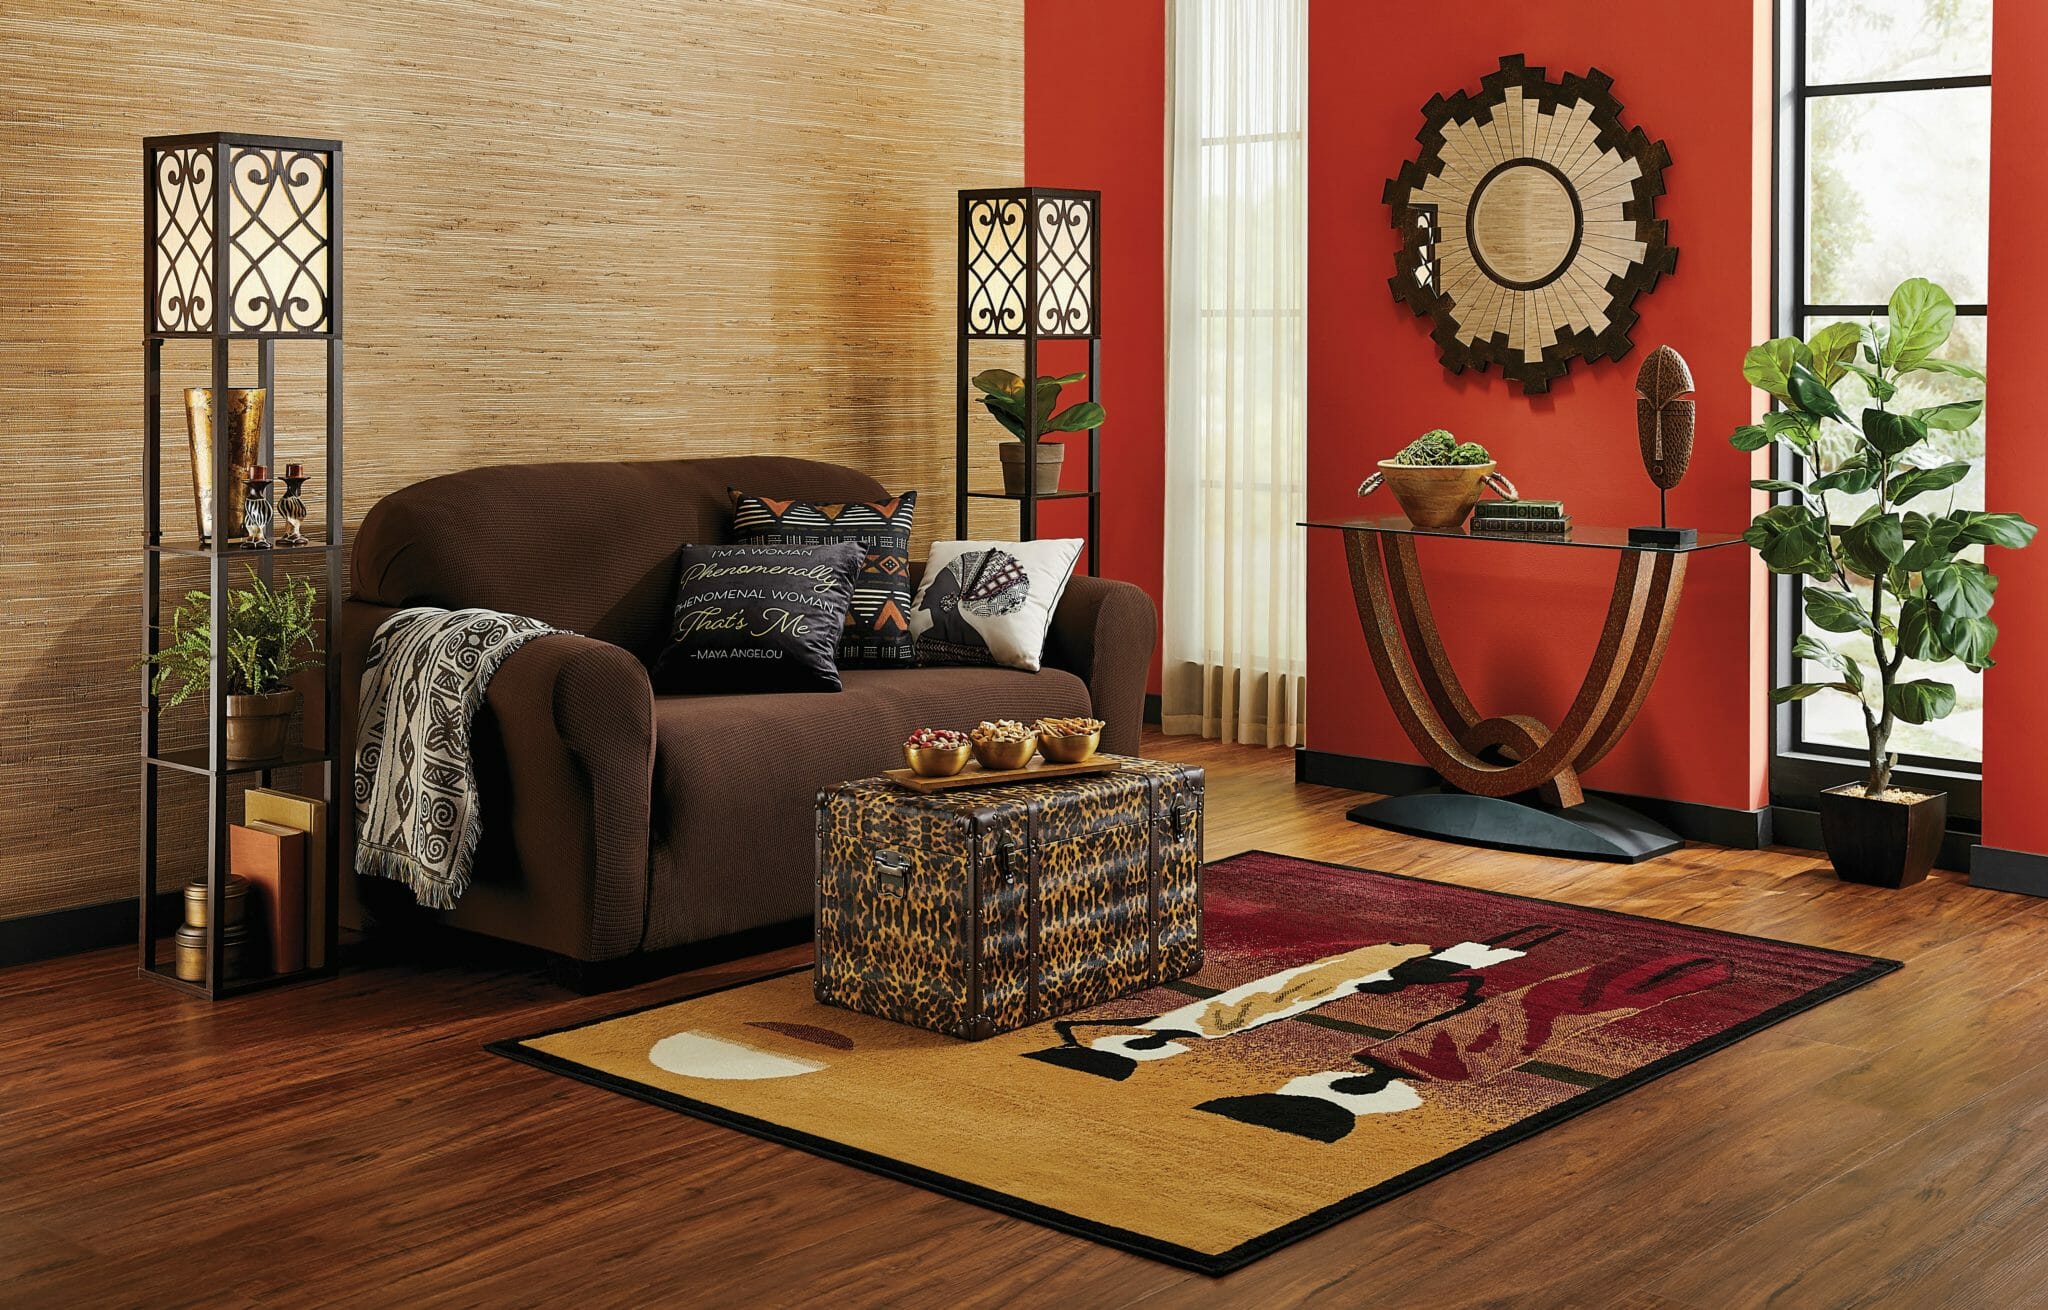 FAMILY ROOM with various décor